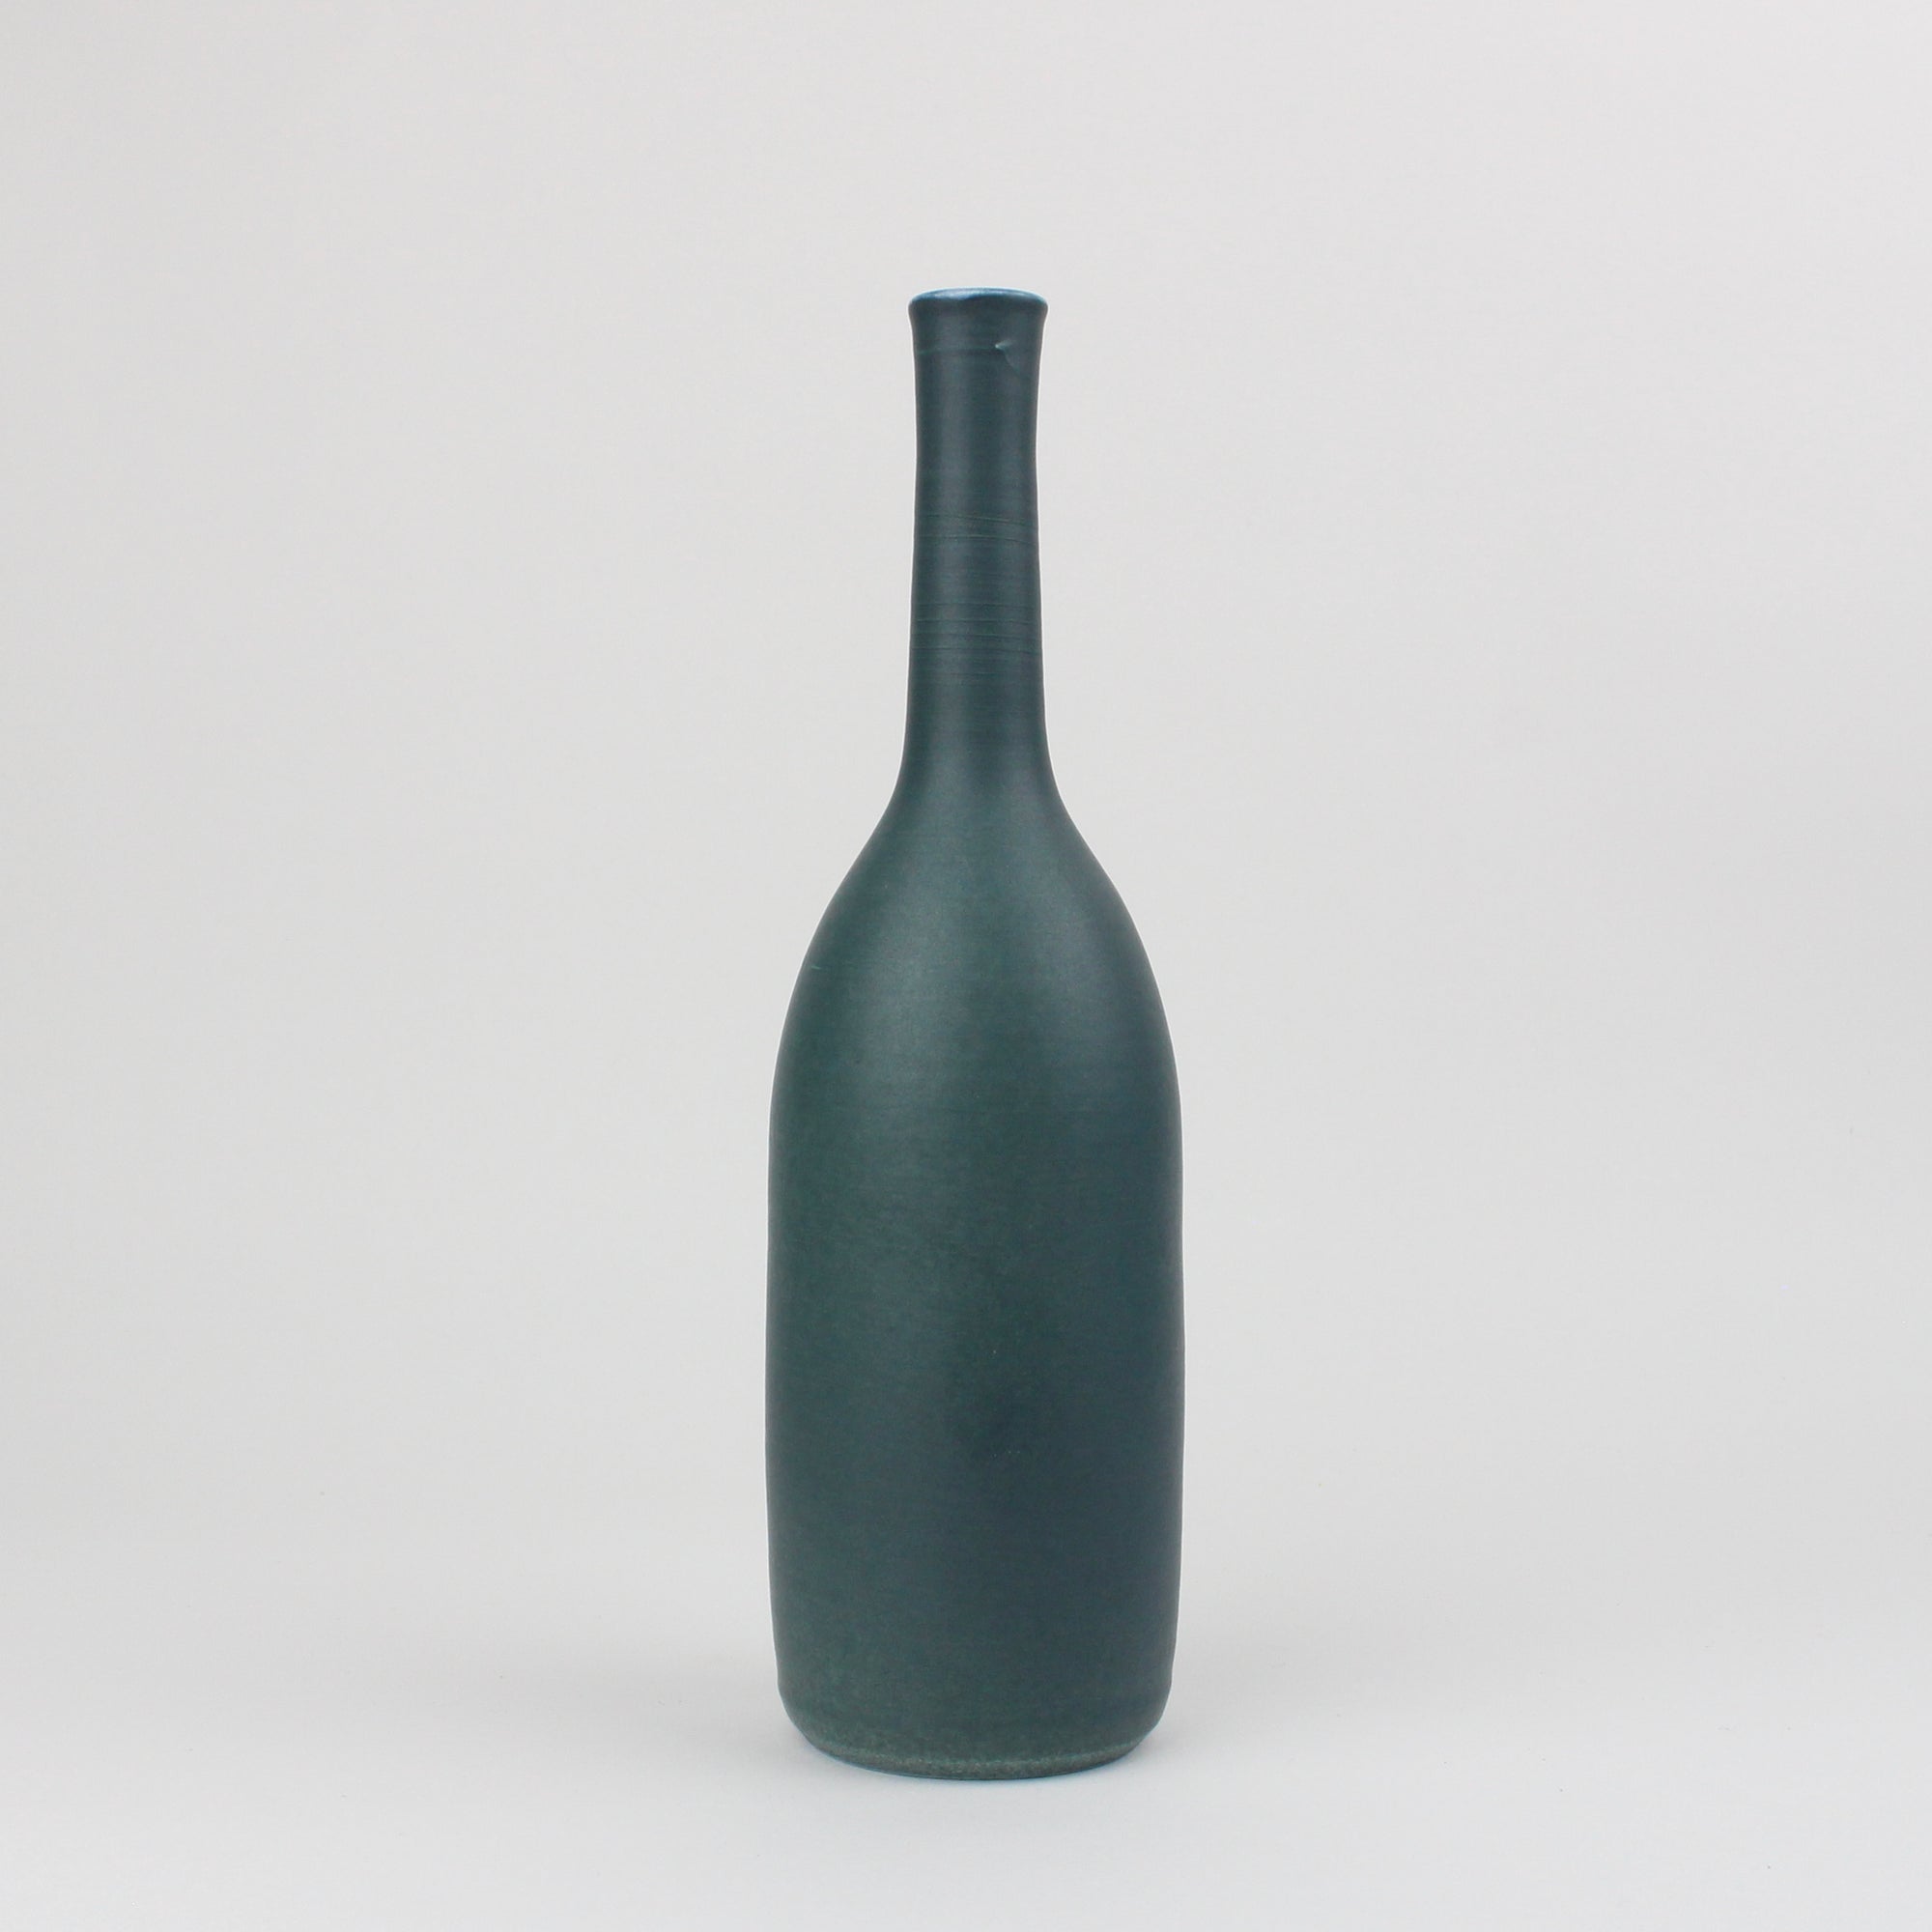 LB173 Deep Teal Bottle by Lucy Burley available at Padstow Gallery, Cornwall